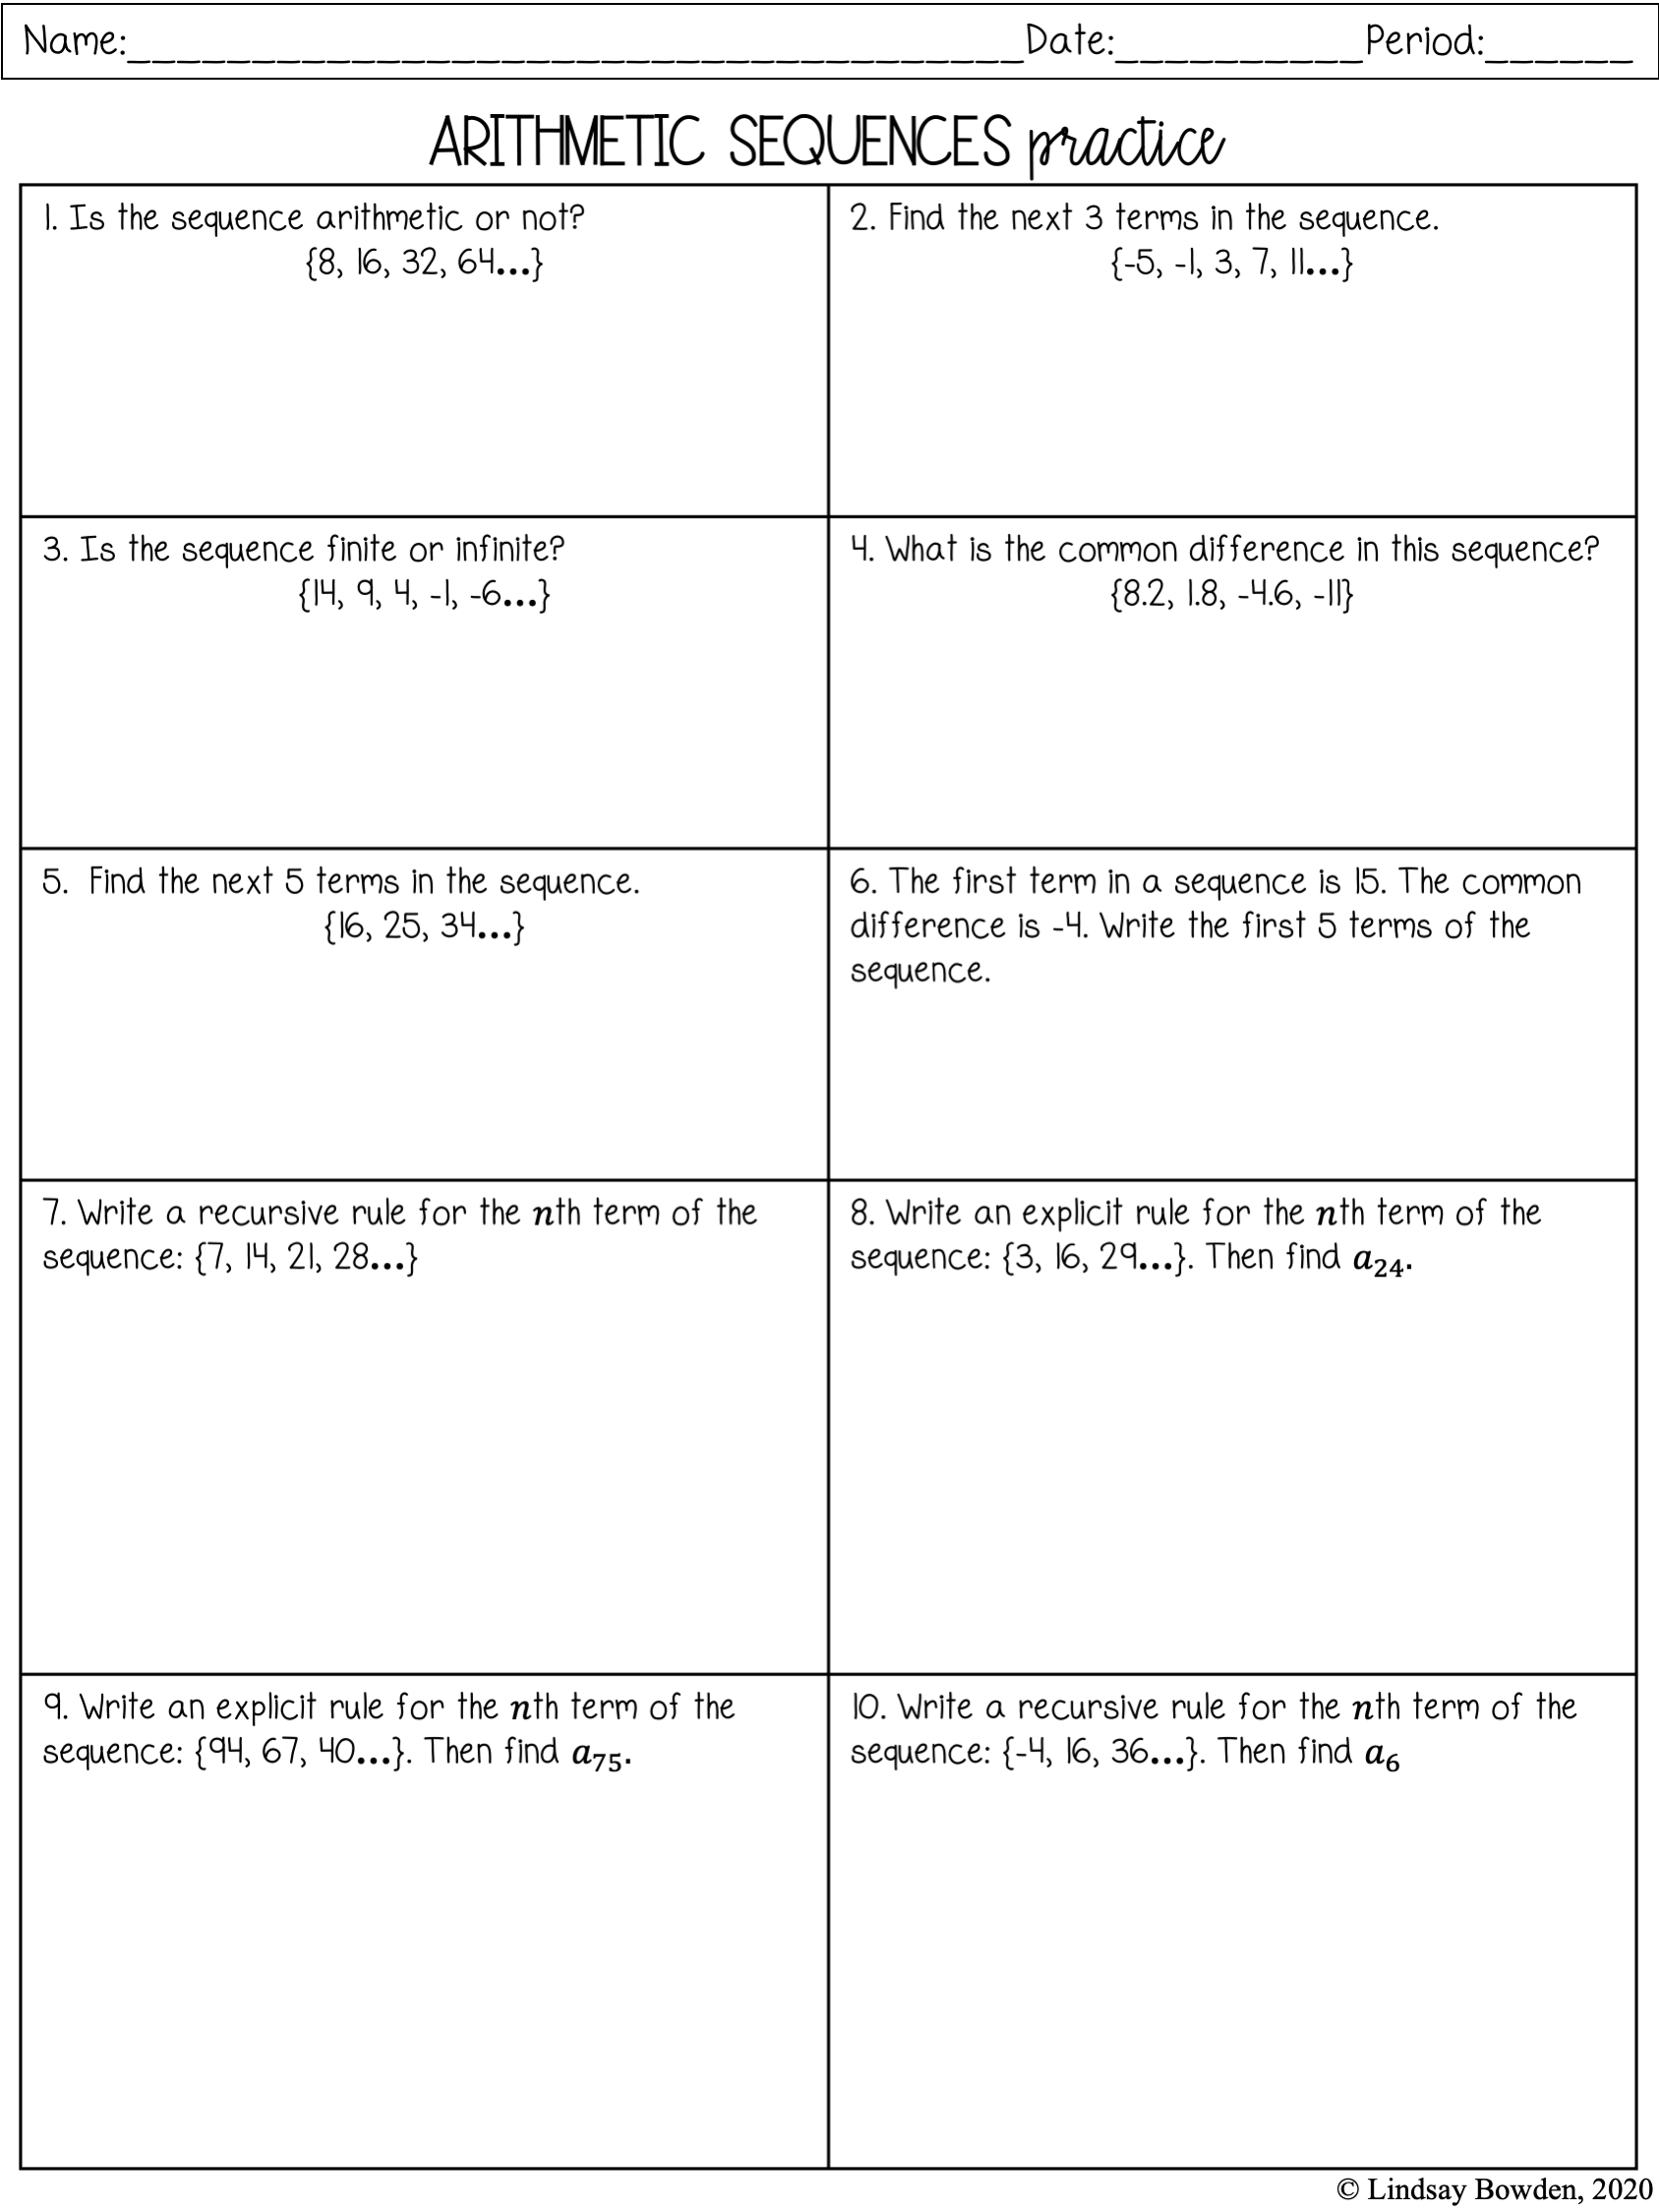 Arithmetic Sequences Notes And Worksheets Lindsay Bowden